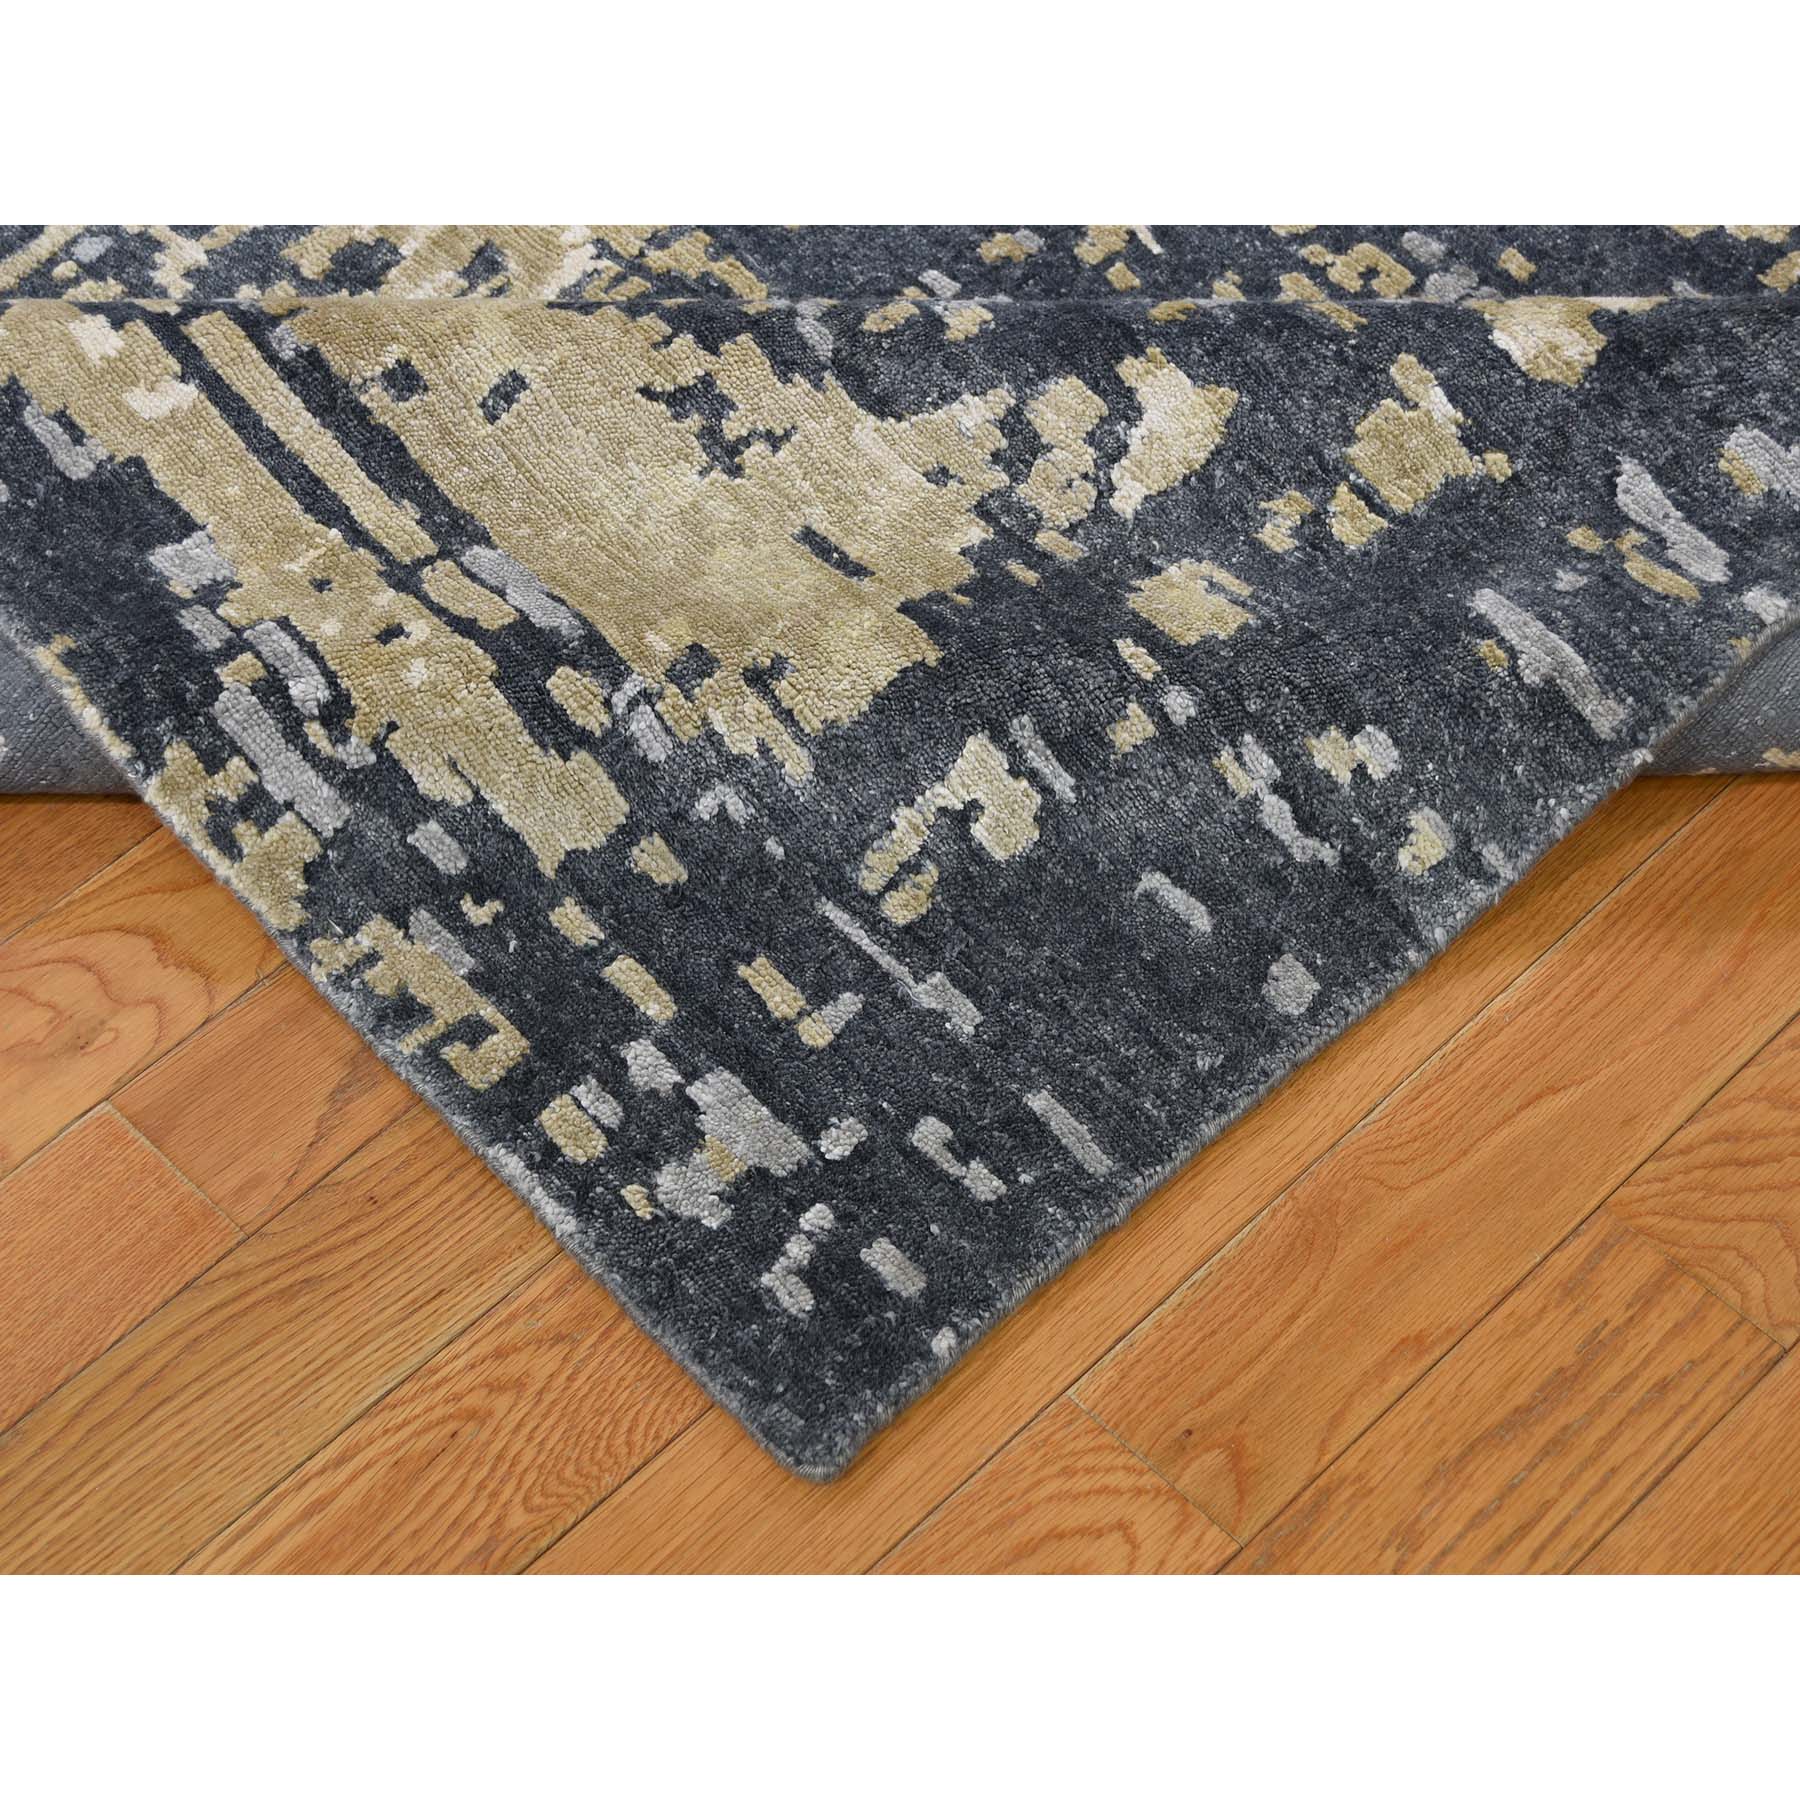 9-2 x12 Wool And Silk Abstract Design Oriental Hand-Knotted Rug 